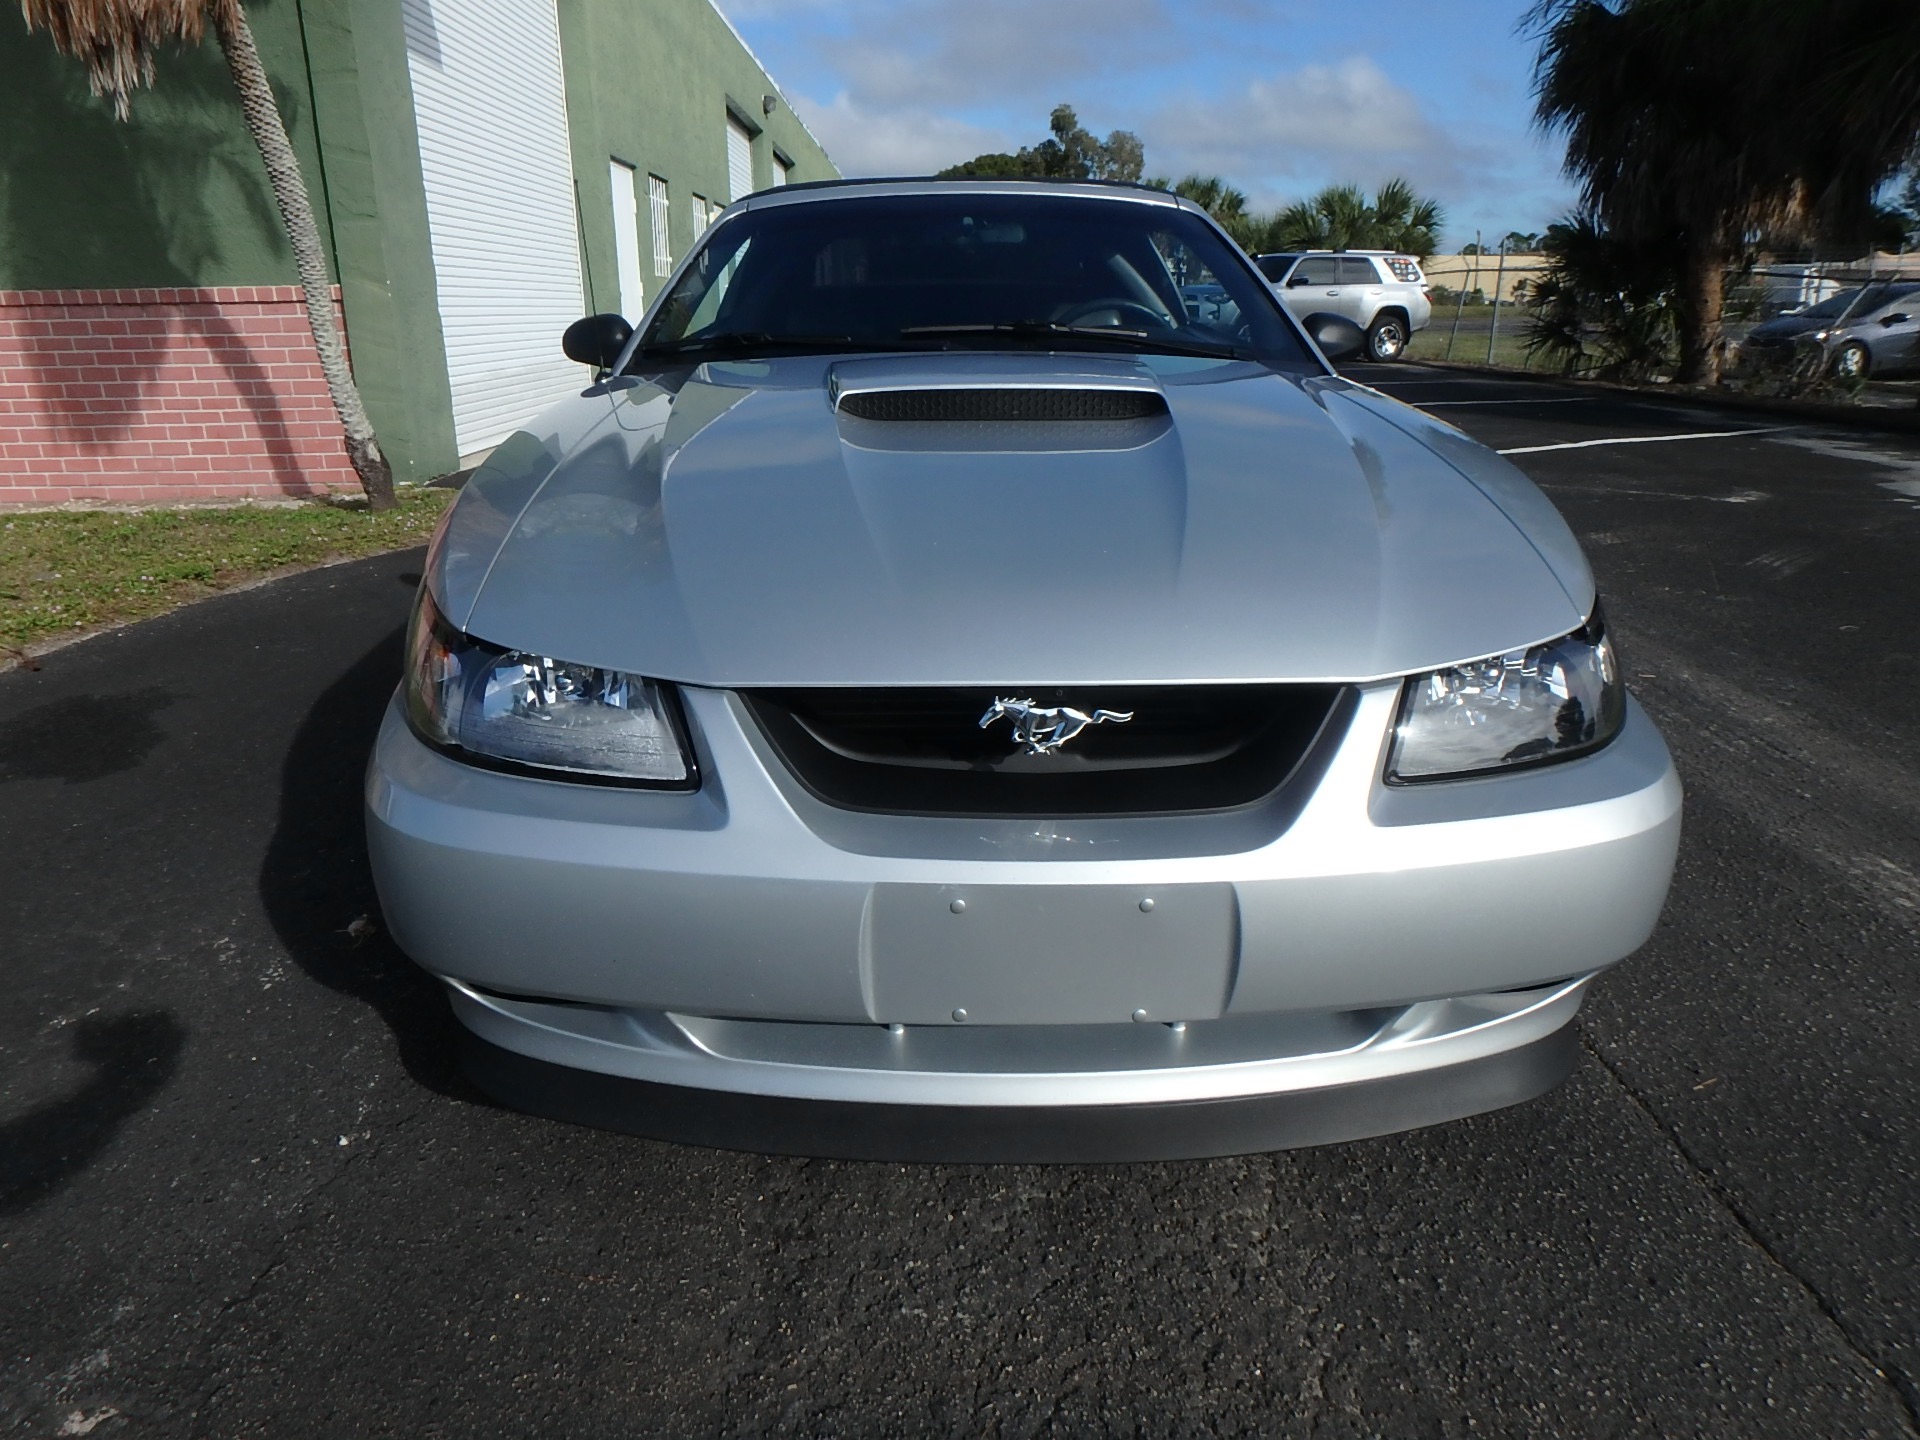 Used 2000 Ford Mustang Gt For Sale 9 900 Rose Motorsports